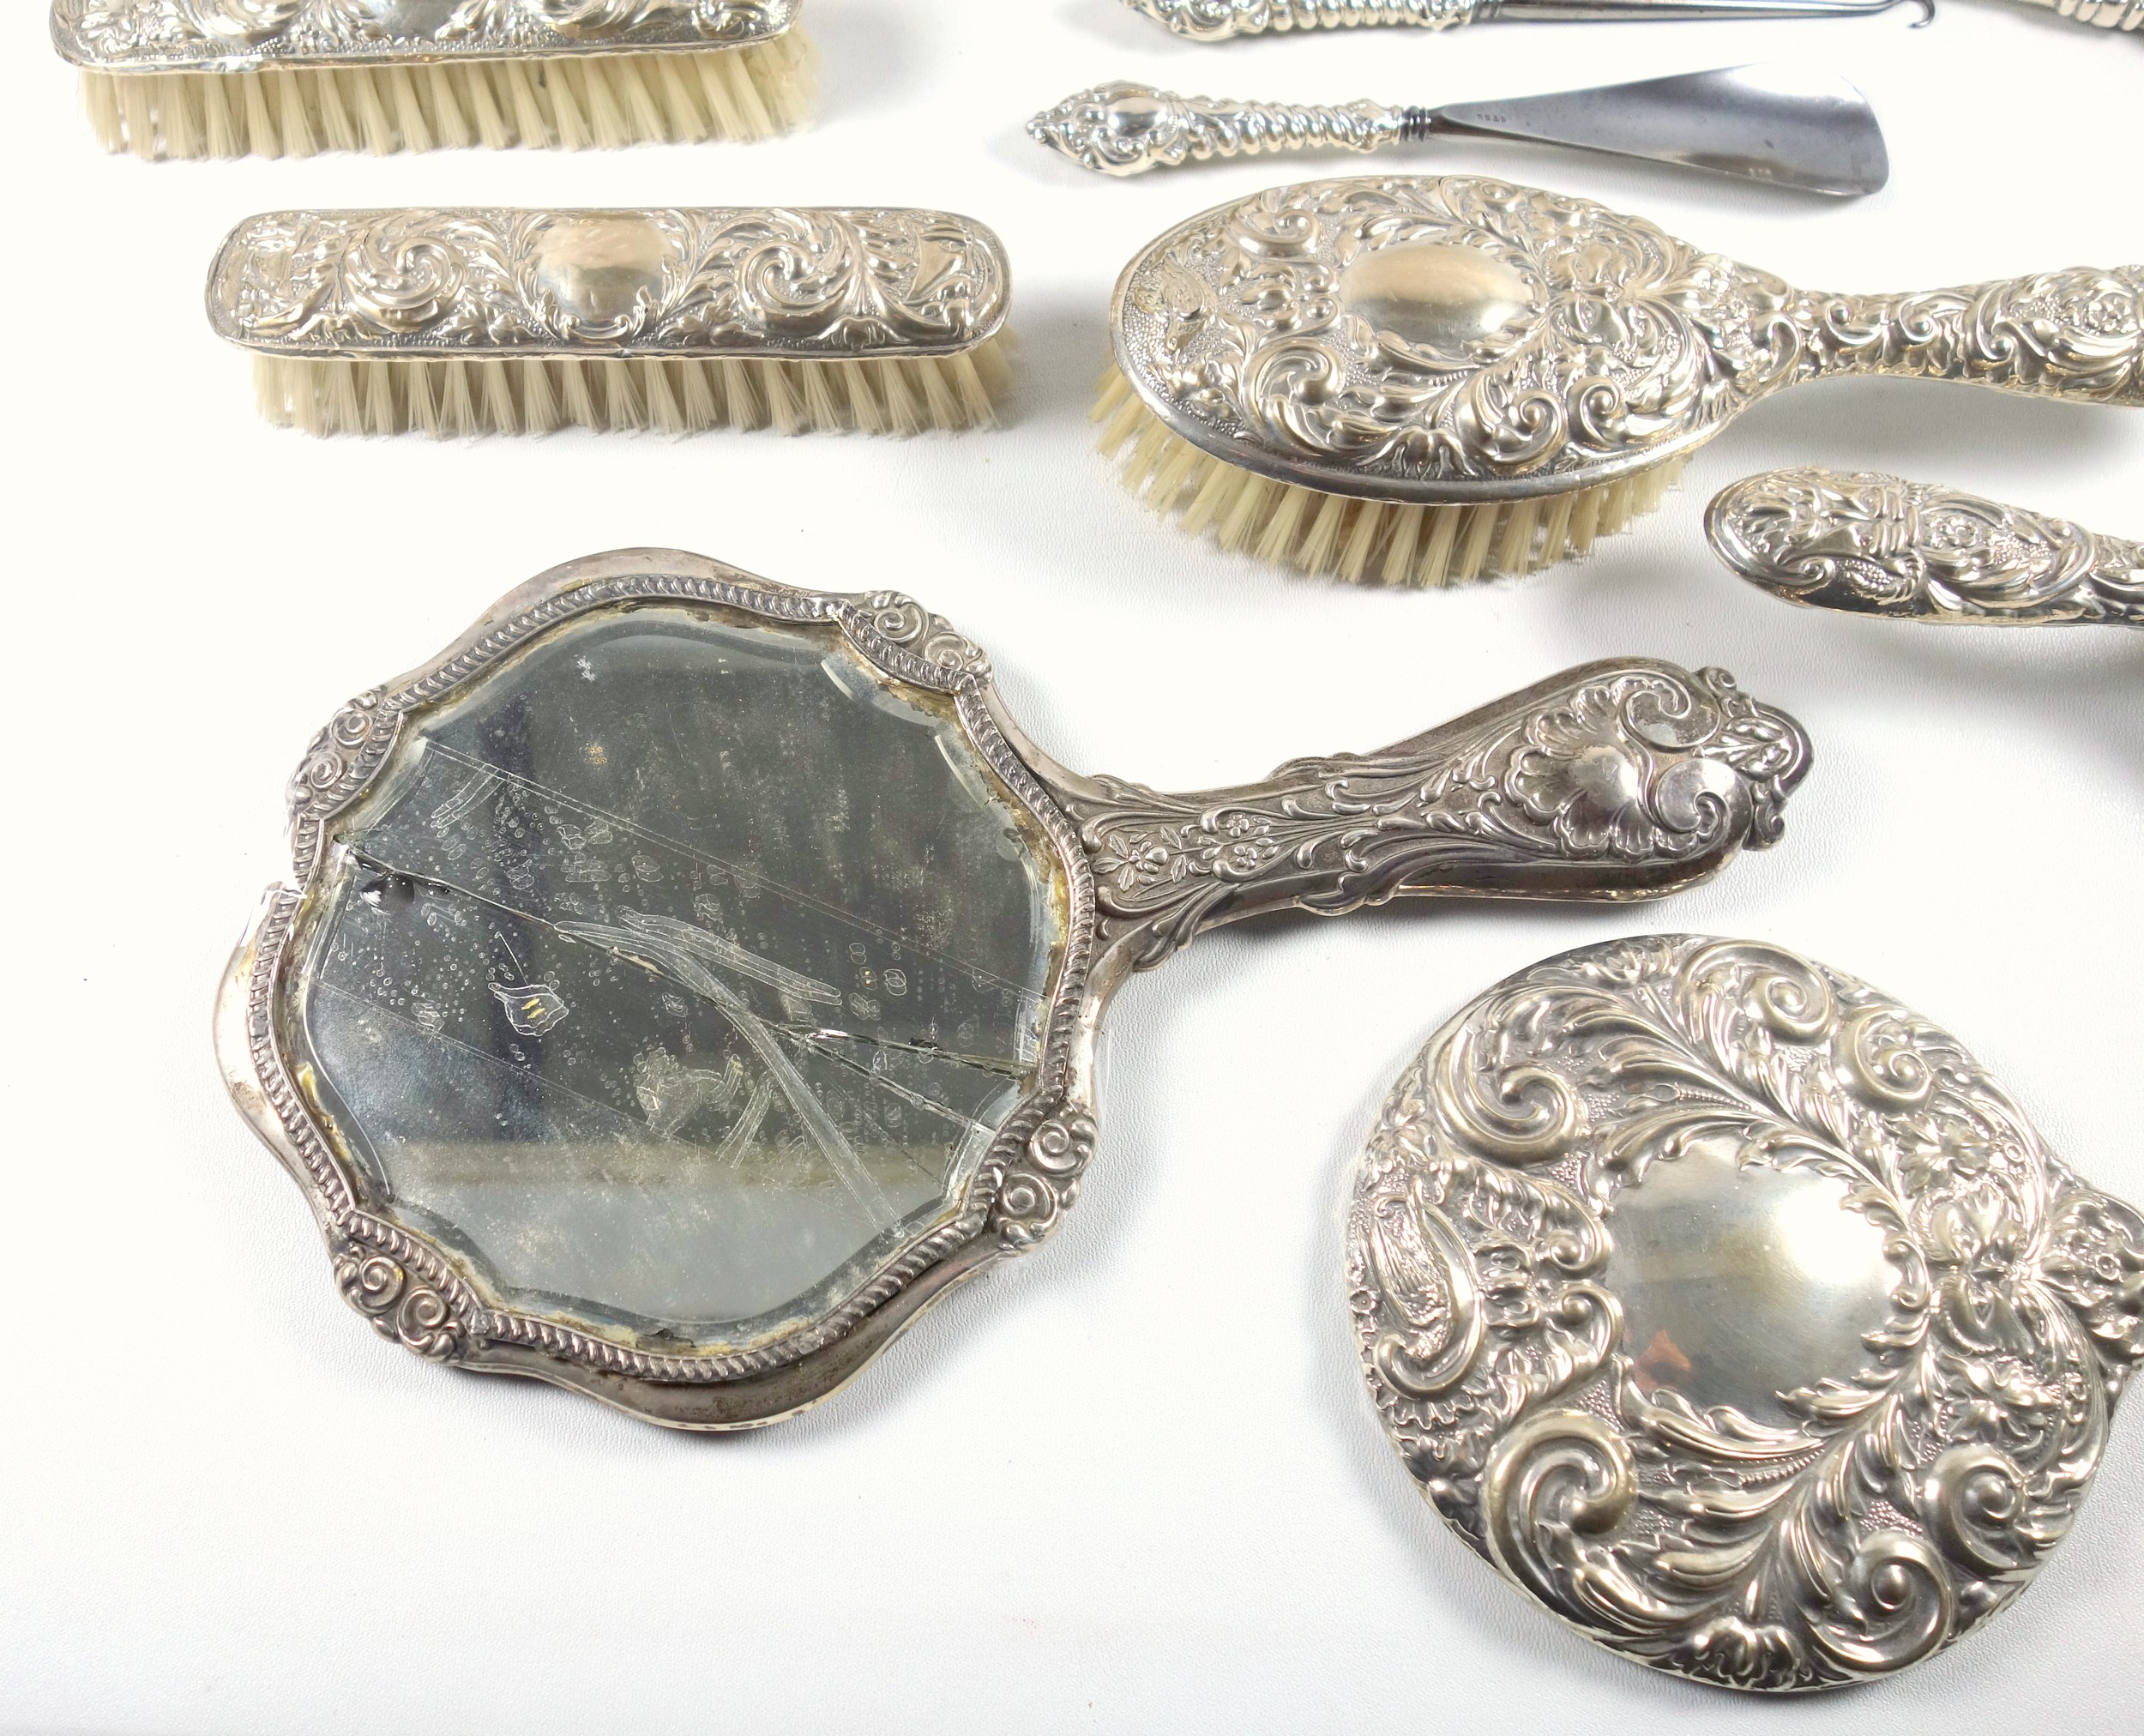 Edwardian 5 piece silver mounted dressing table set with embossed floral decoration and monogram, - Image 4 of 5